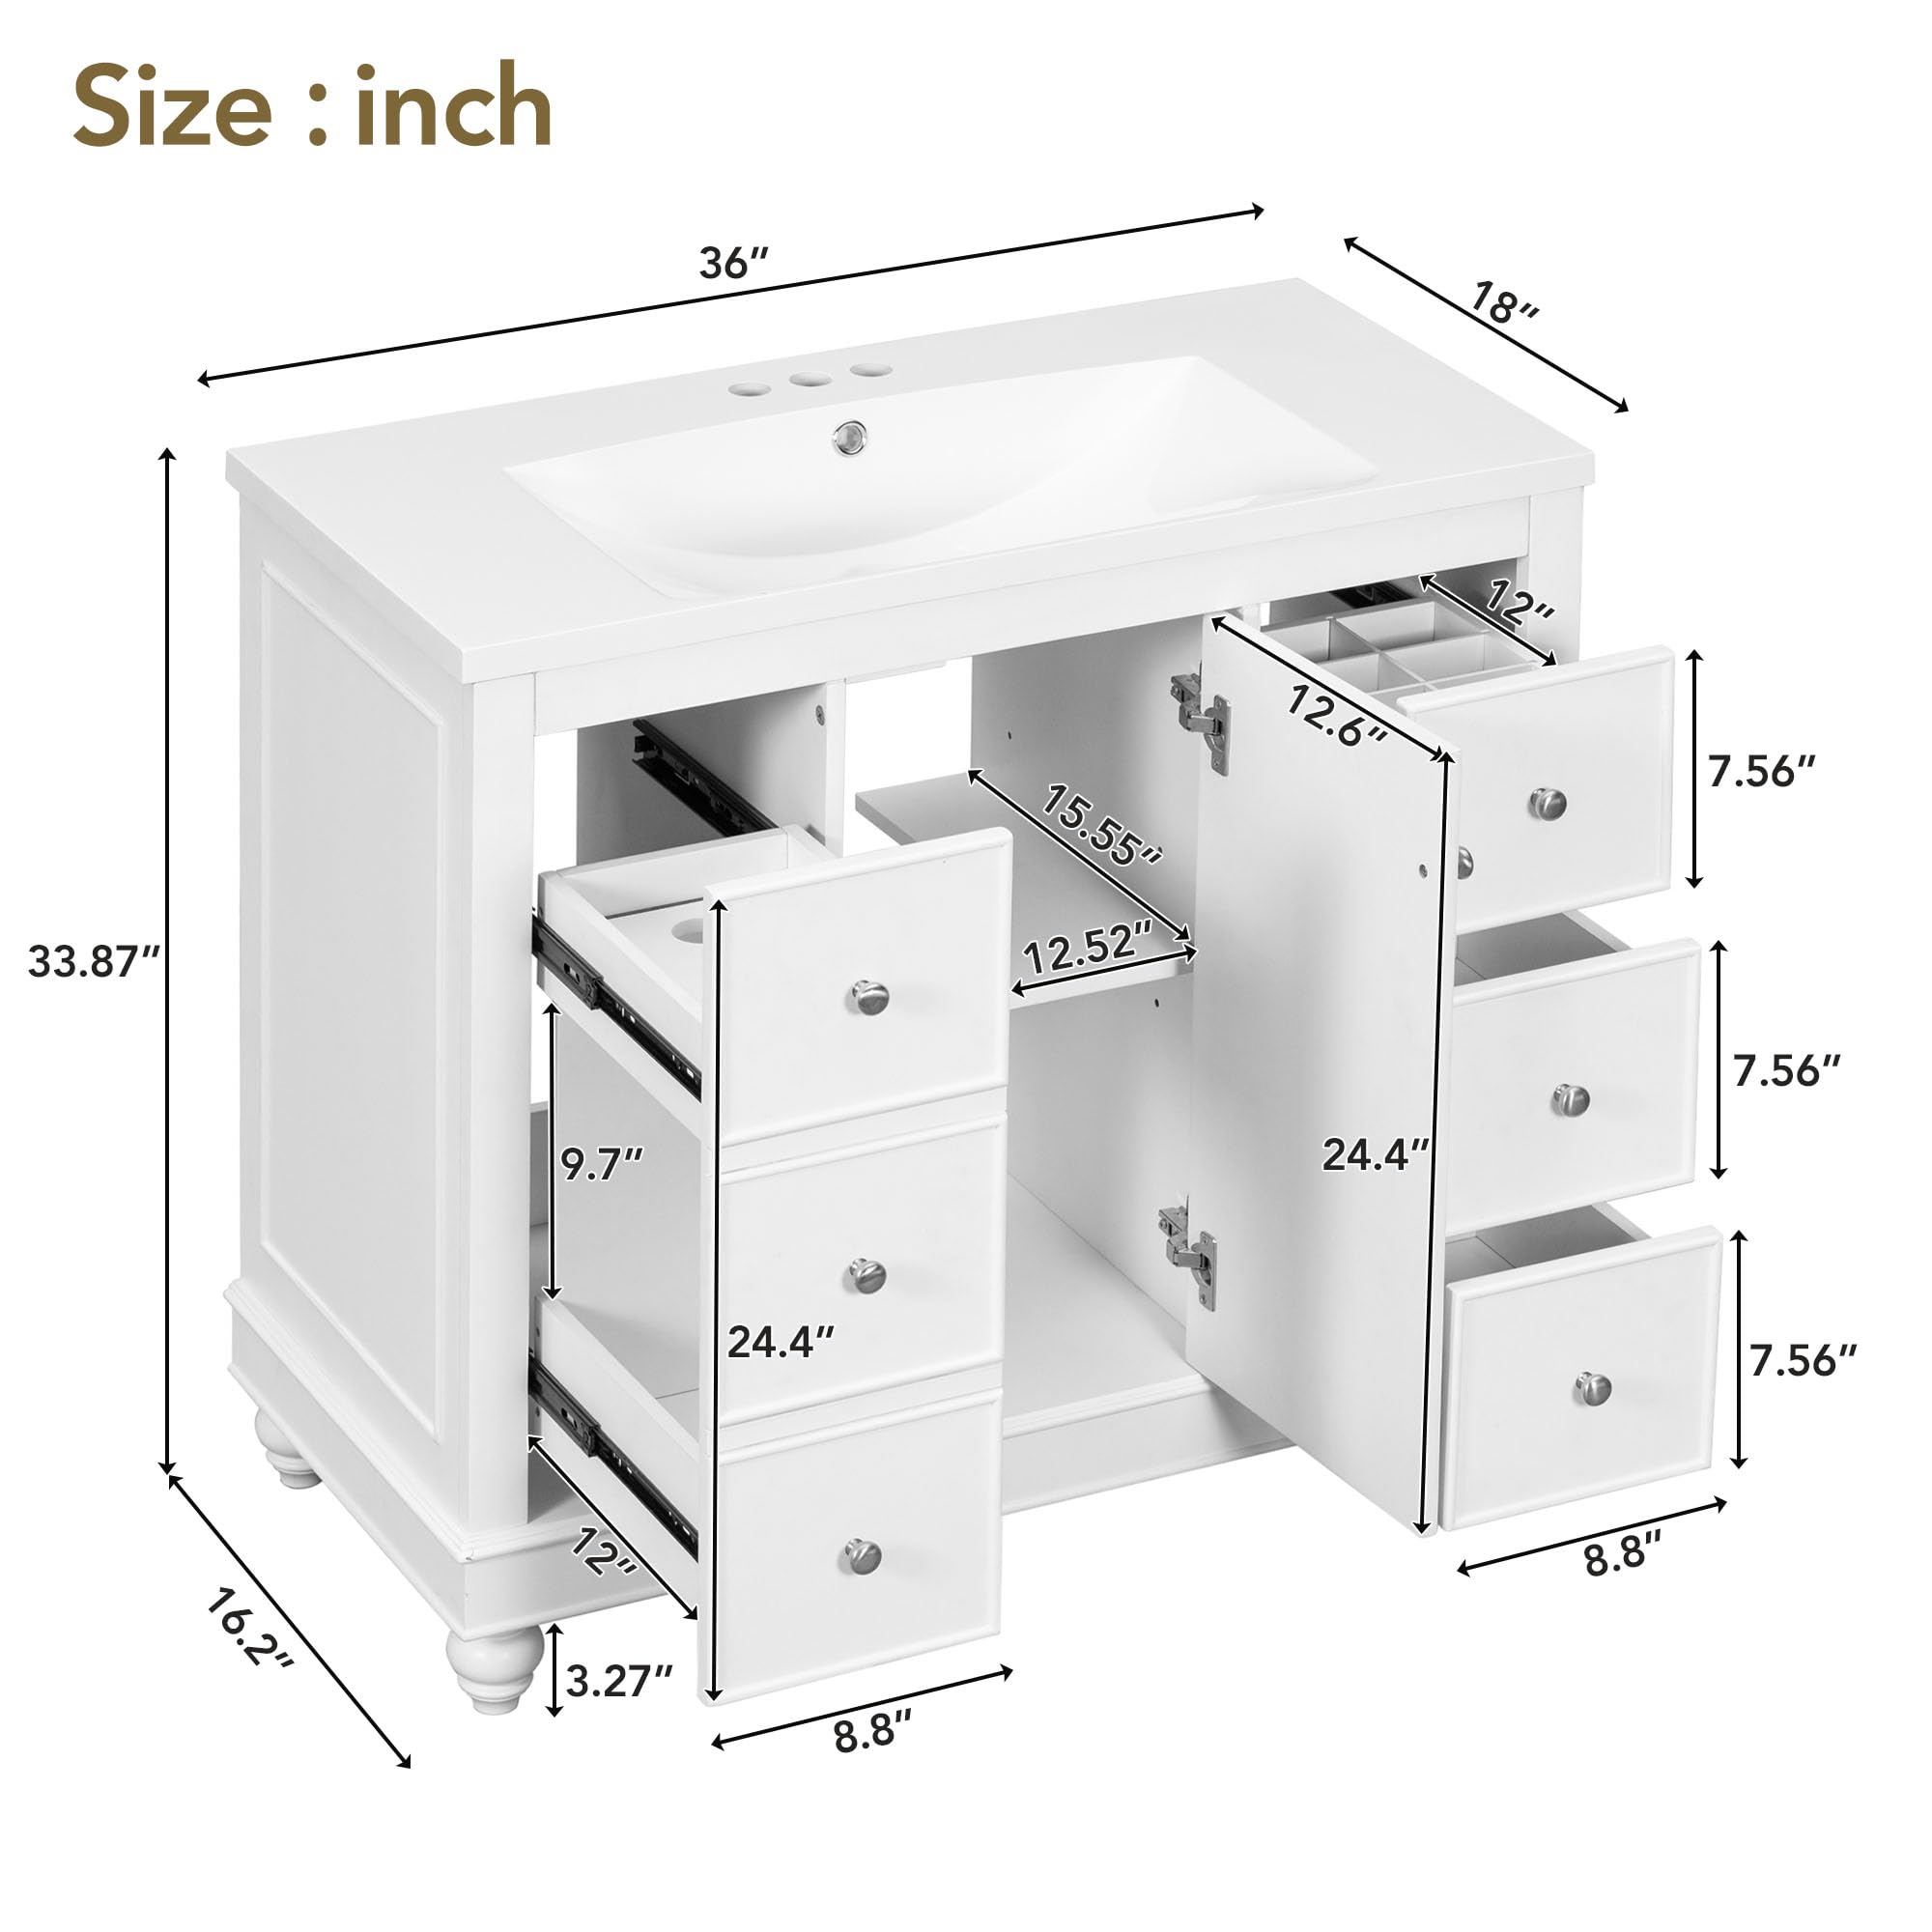 Lostcat 36inch Bathroom Vanity with Undermount Sink,Resin Basin,with Door and 4 Drawers,with Adjustable Shelves,Easy Assembly,Multipurpose Storage Bath Vanity(White)